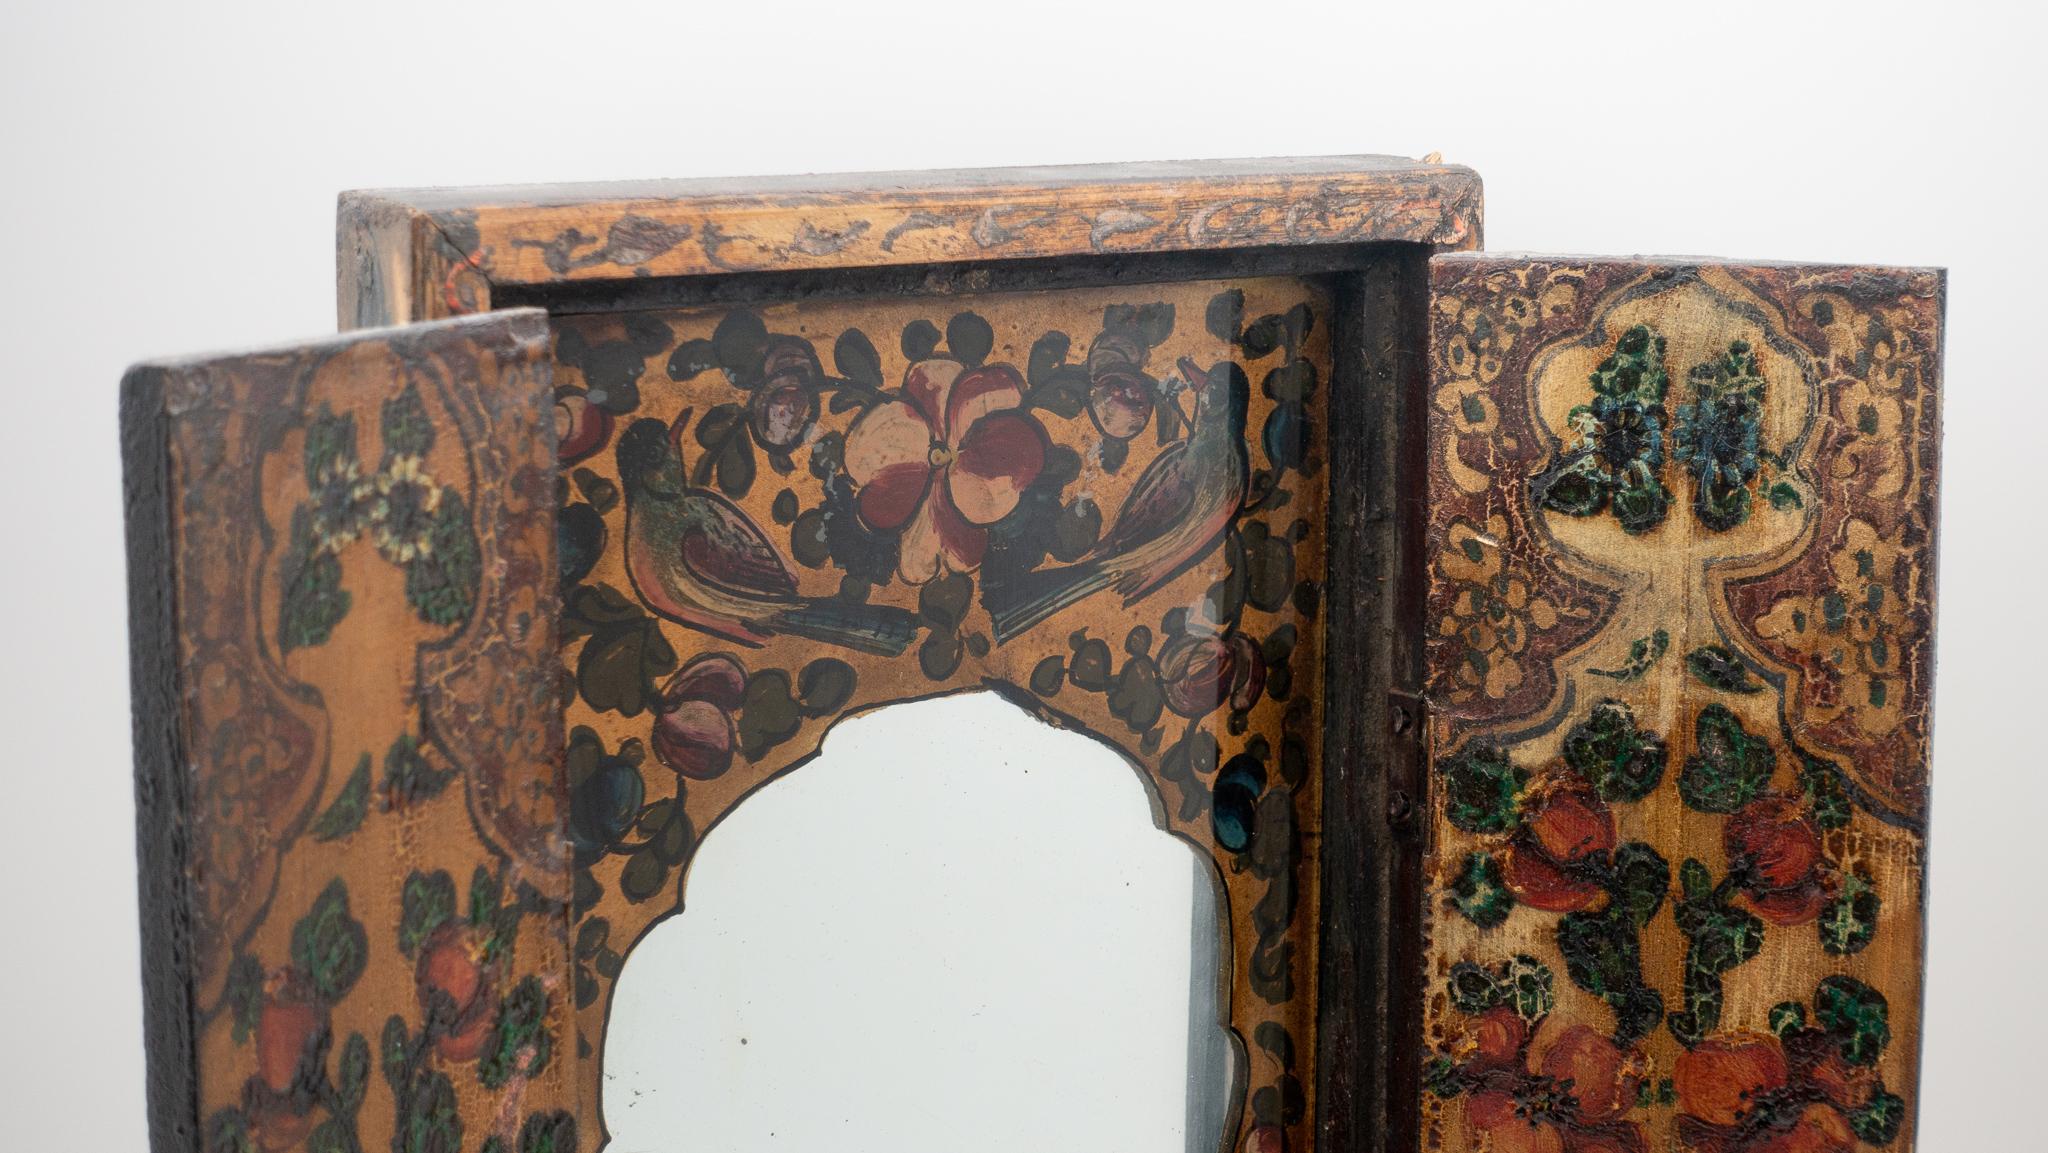 19th century Qajar-era Persian mirror with painted wood frame, hinged panels that open to reveal a painted églomisé mirror interior, and a wooden back cover to protect the glass.